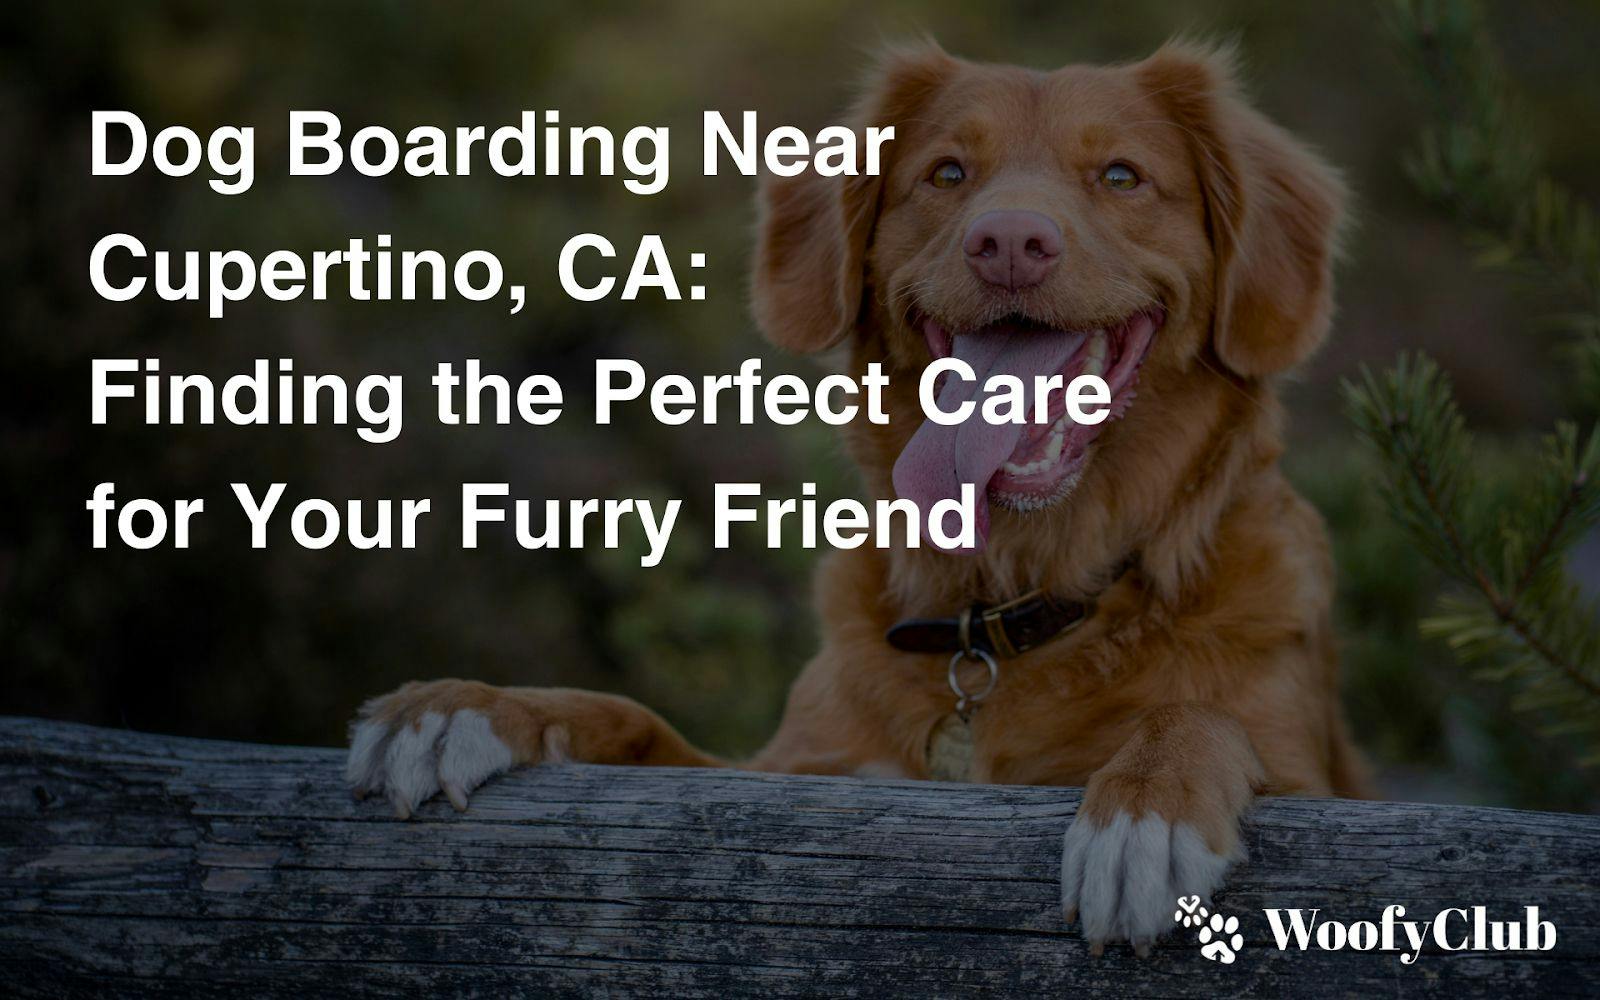 Dog Boarding Near Cupertino, CA: Finding The Perfect Care For Your Furry Friend